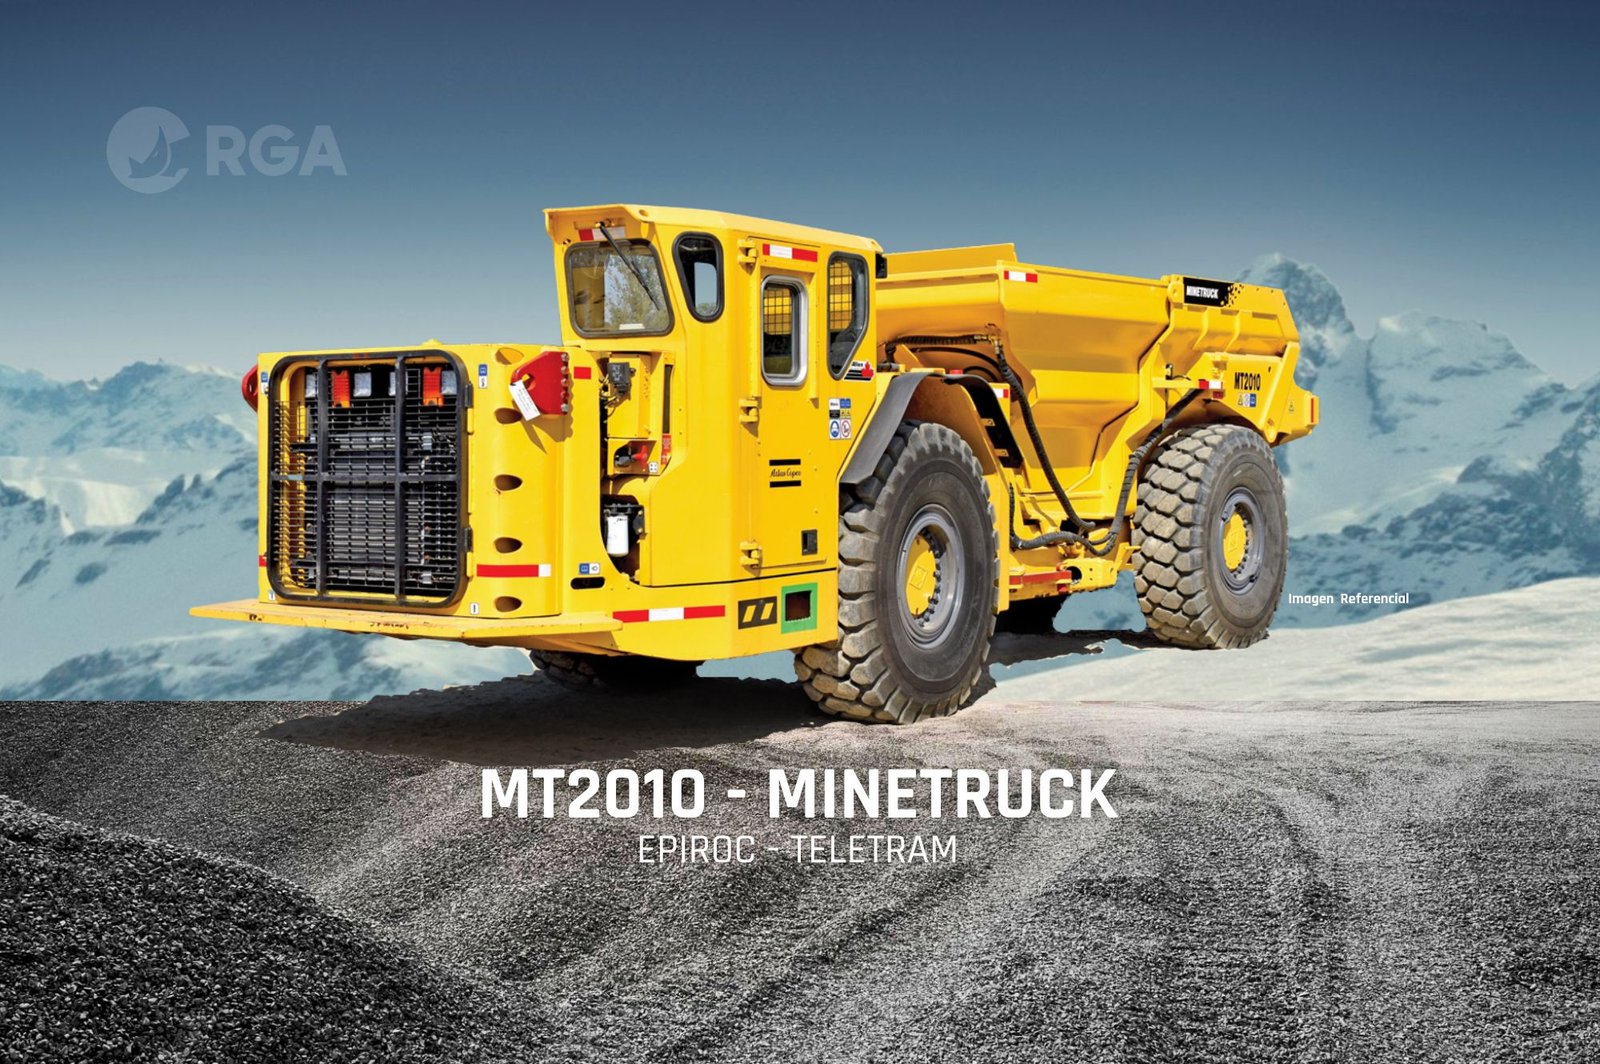 Fully Reconditioned Epiroc MT-2010 Minetruck, Teletram dump box with full 20 ton capacity, NEW Cummins QSL9 engine, Rebuilt axles, Transmission, Torque converter, Full EROPS cab with A/C